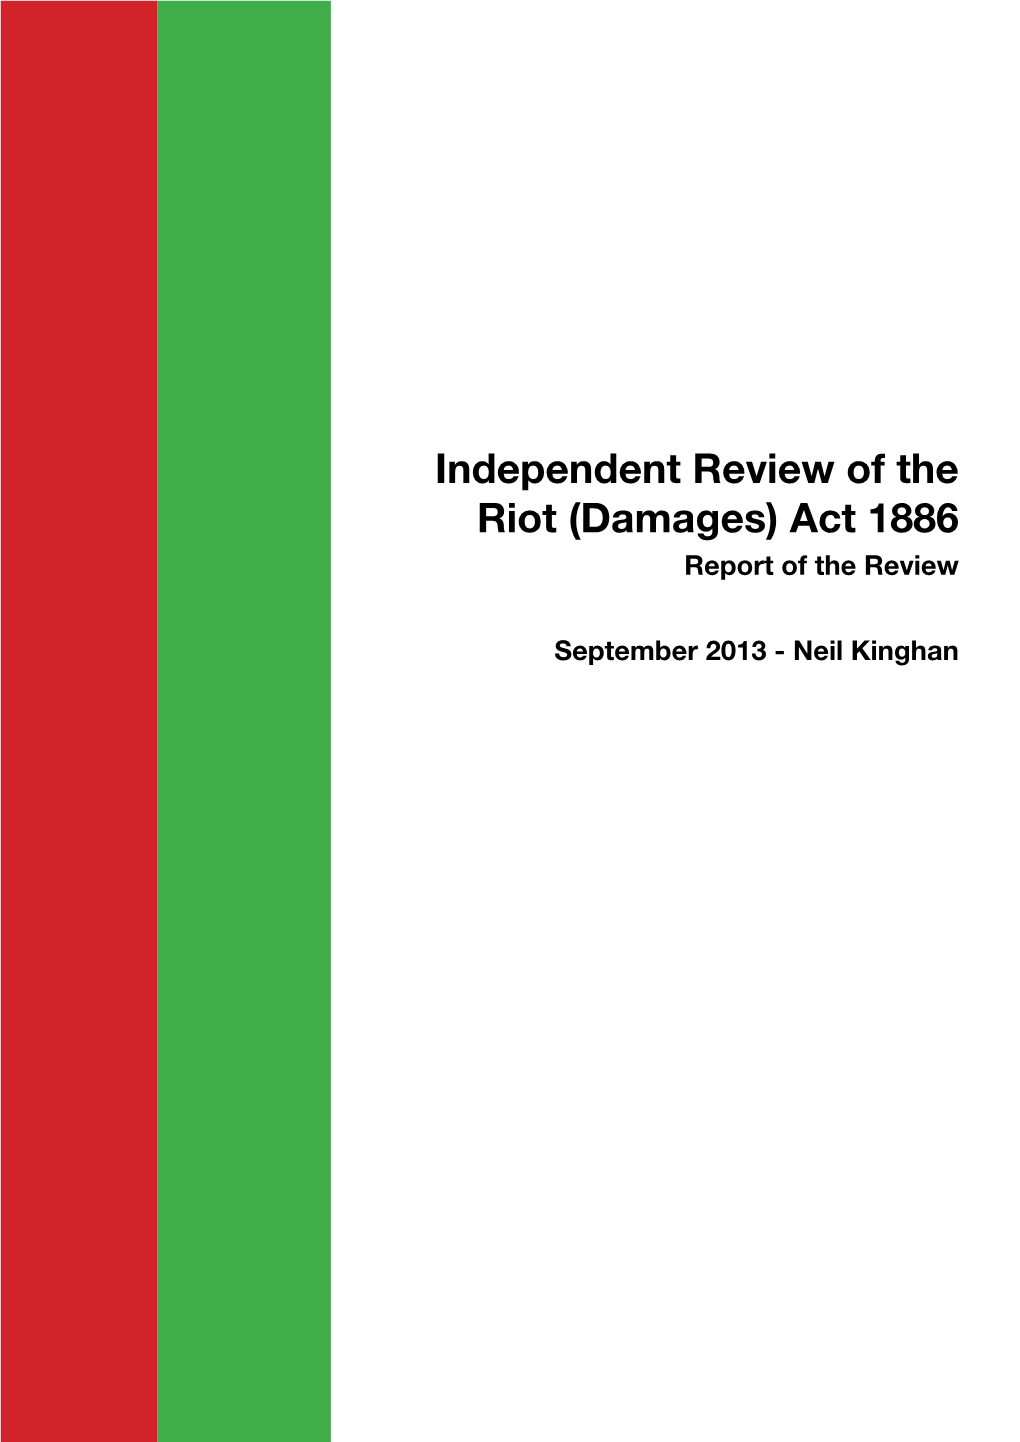 Independent Review of the Riot (Damages) Act 1886 Report of the Review